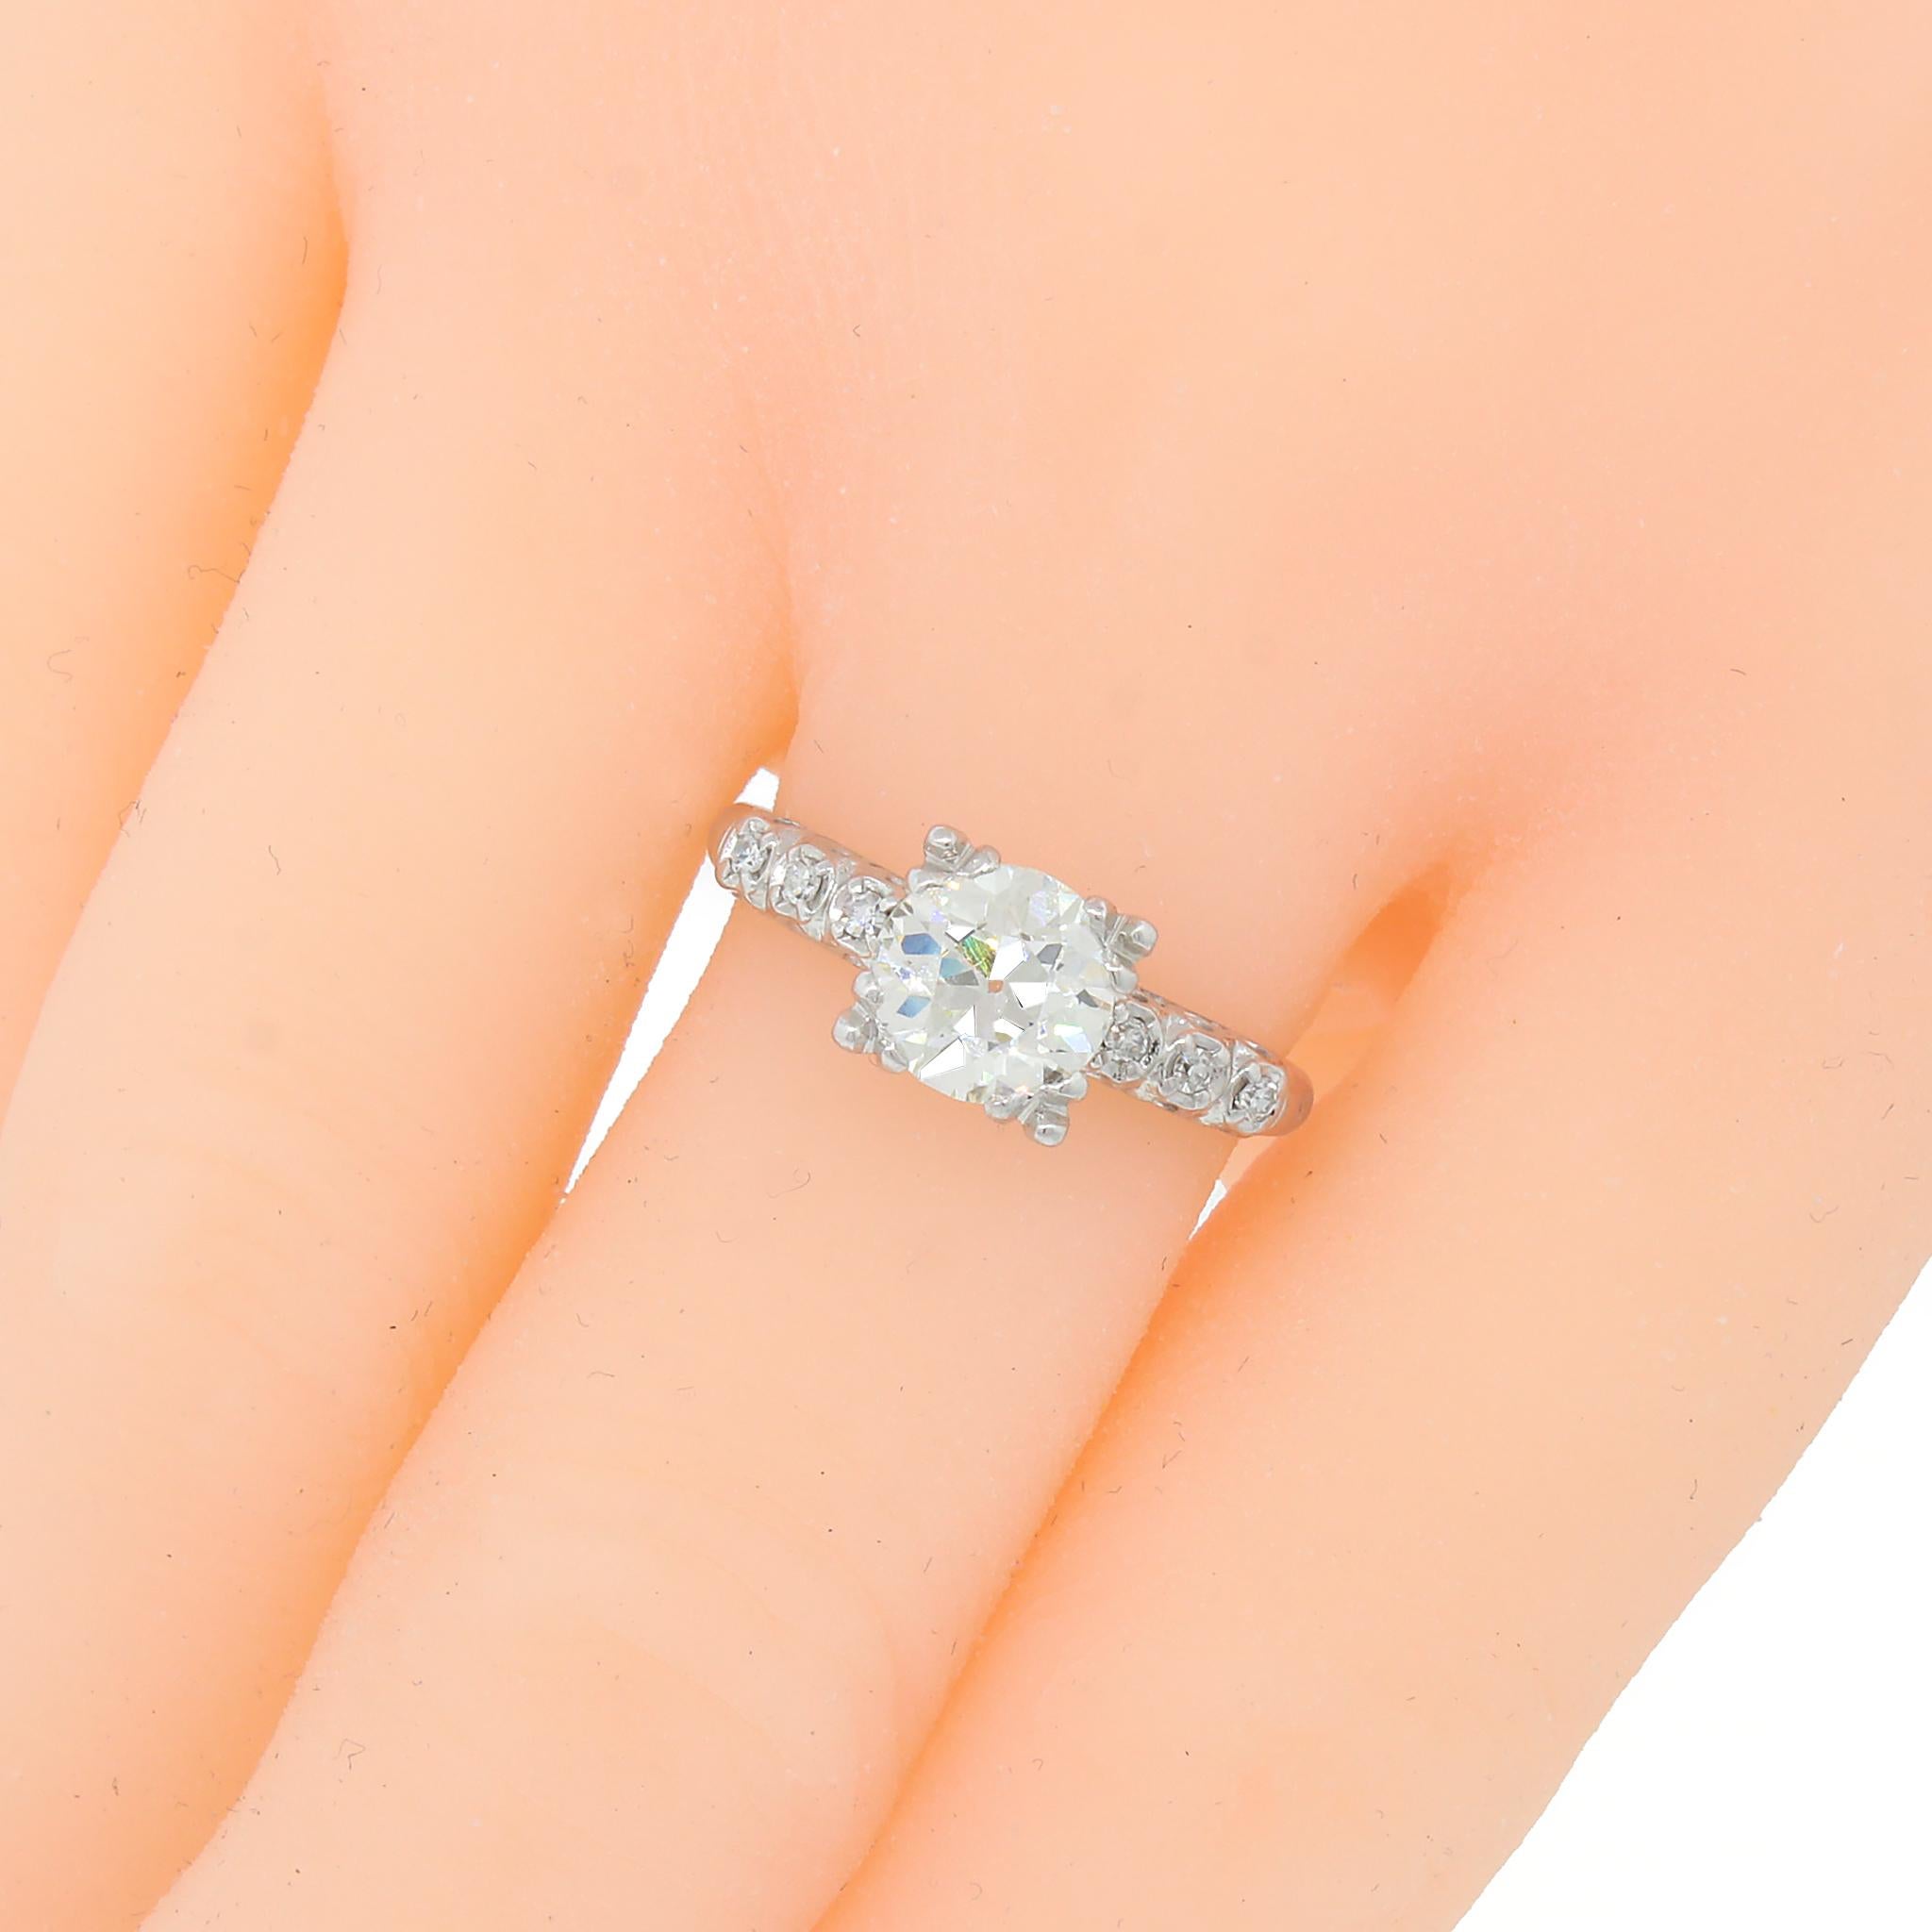 14 kt White Gold
Cut: Old Mine Cut
Carat: 1.70 carat
Color: L-M
Clarity: SI
Ring Size: 7
Total Weight: 3.7 grams